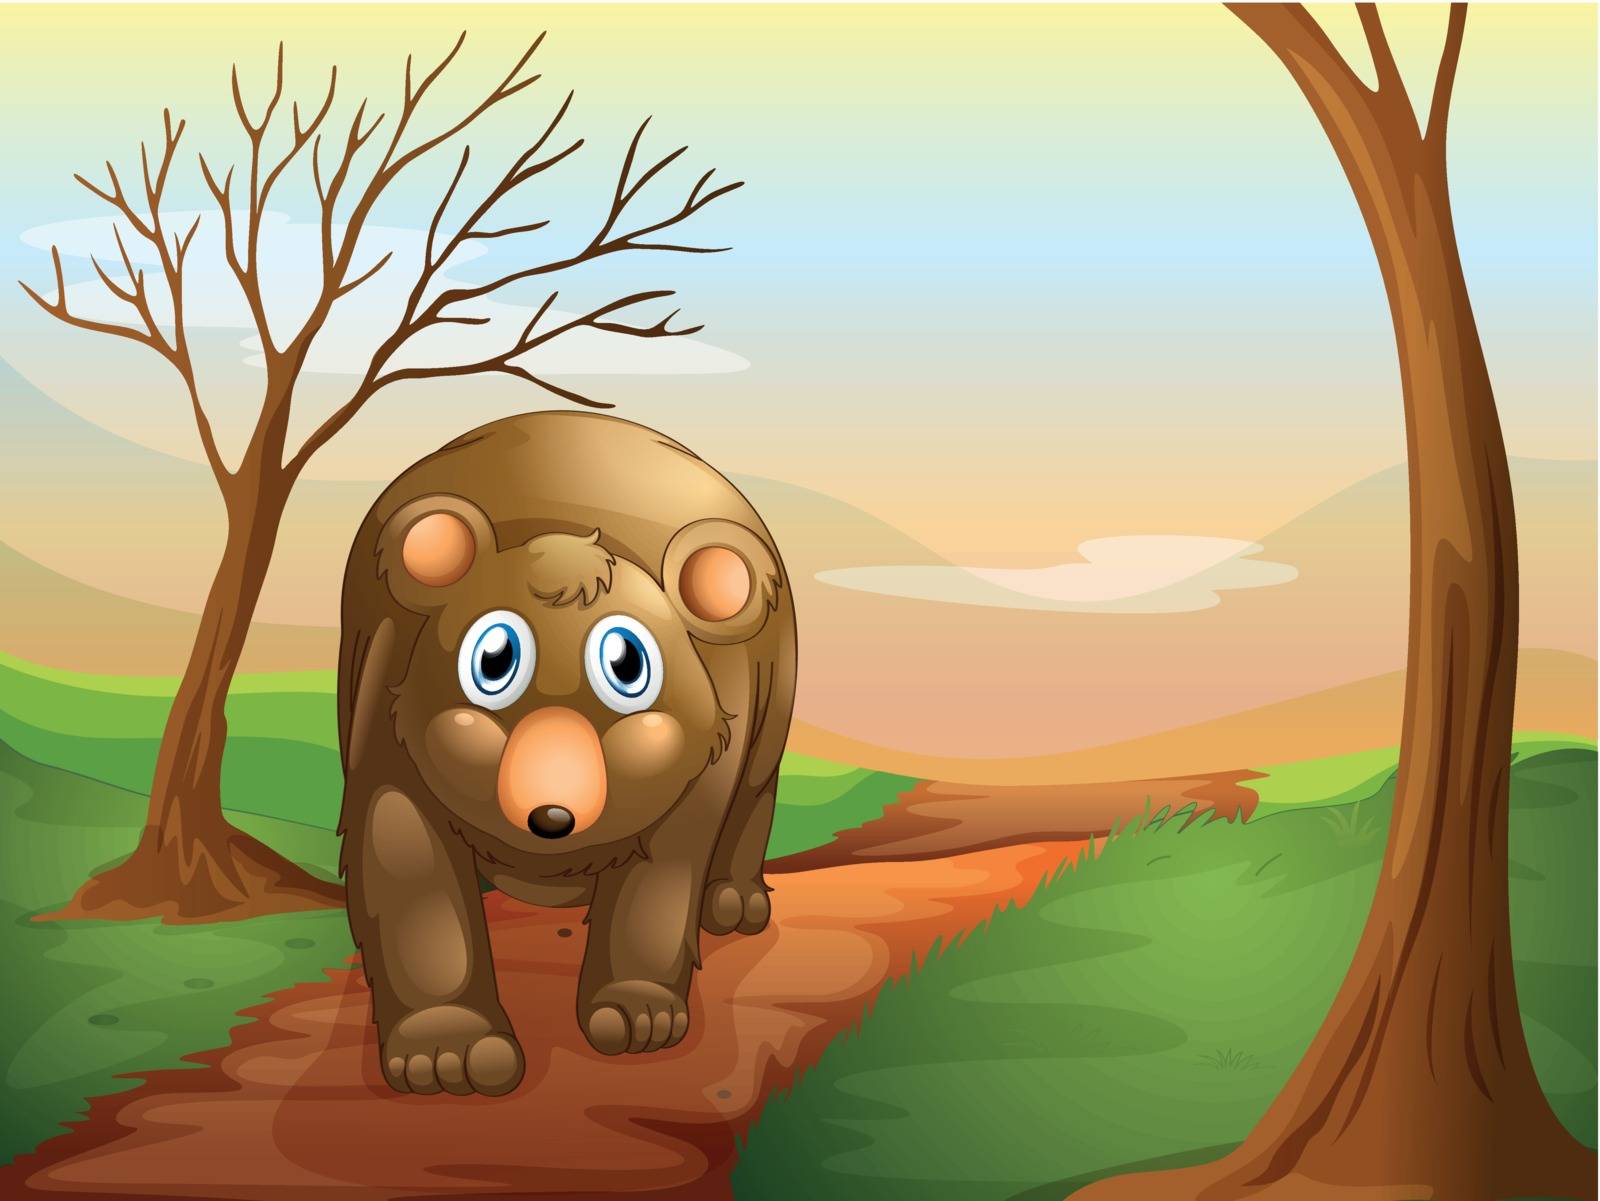 Illustration of the lonely bear walking